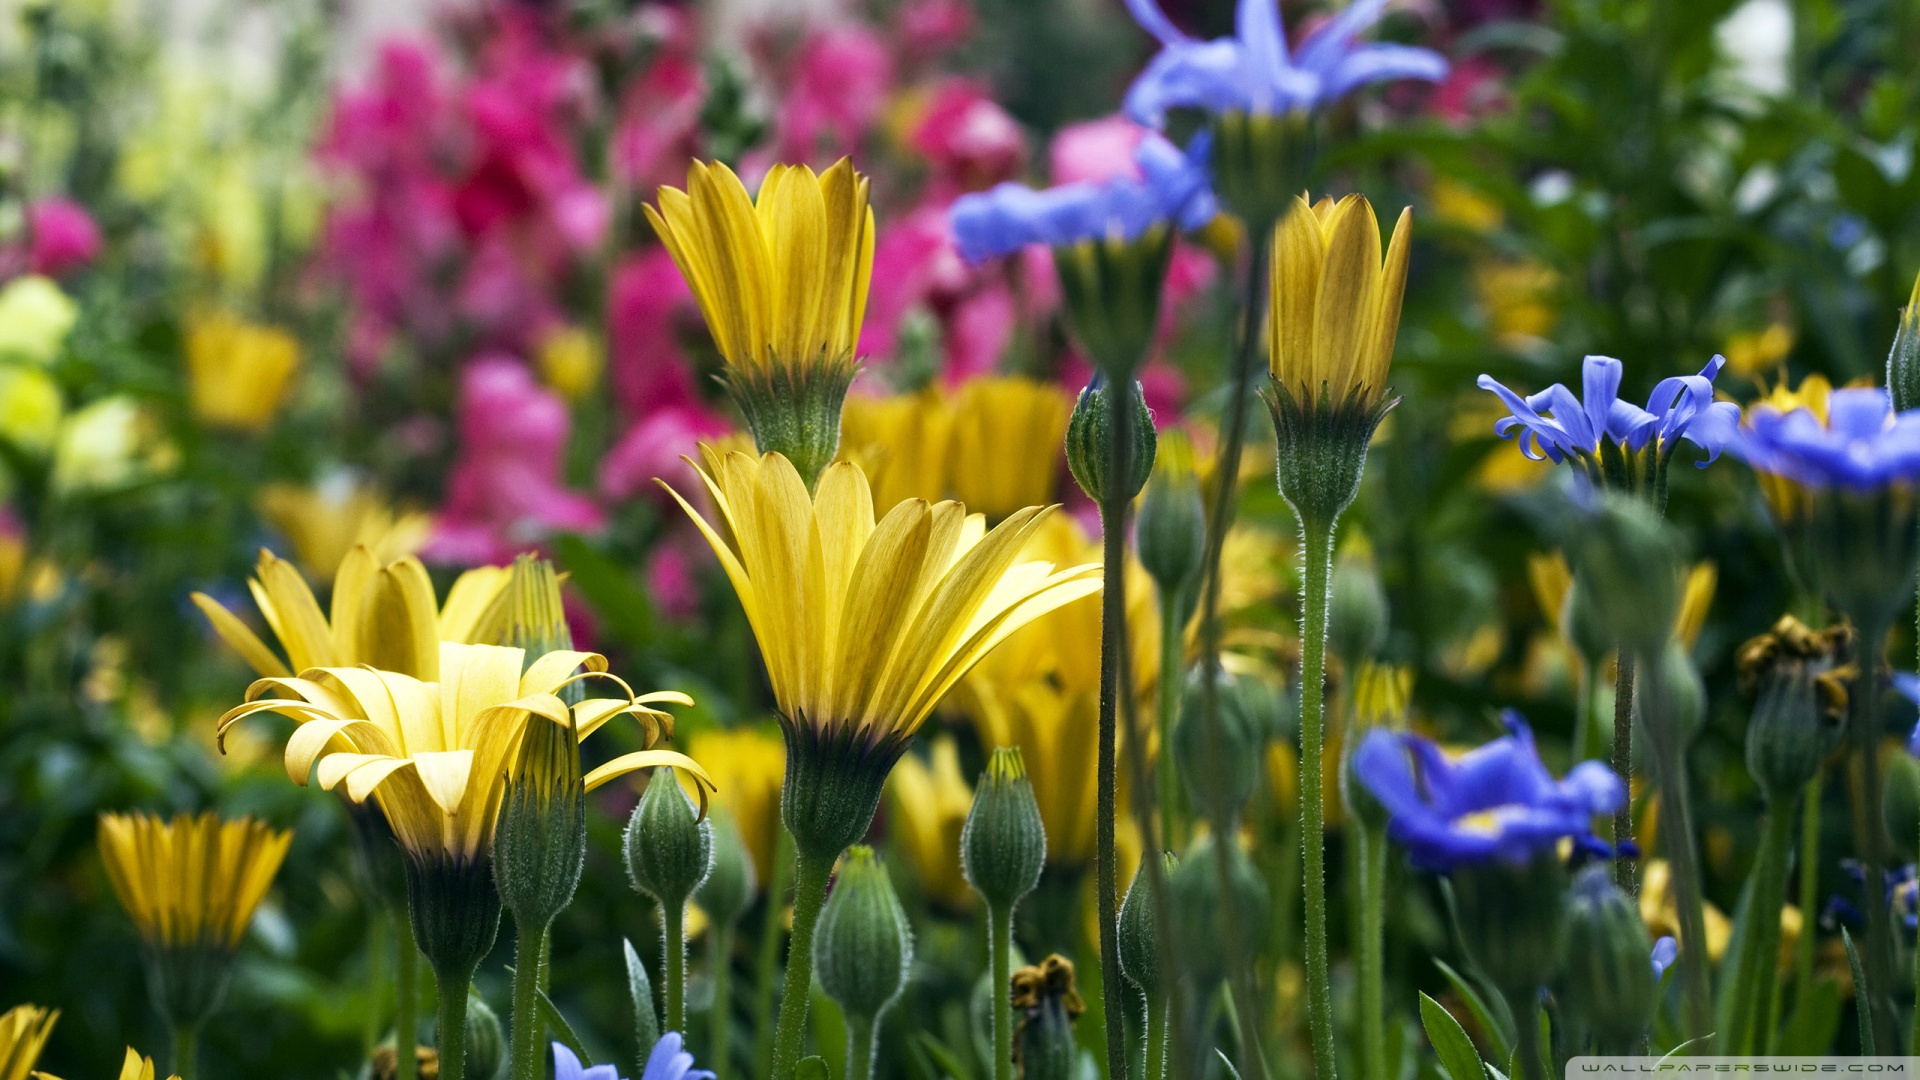 Another Spring HD Wallpaper Pack For You And Your Friends Desktop